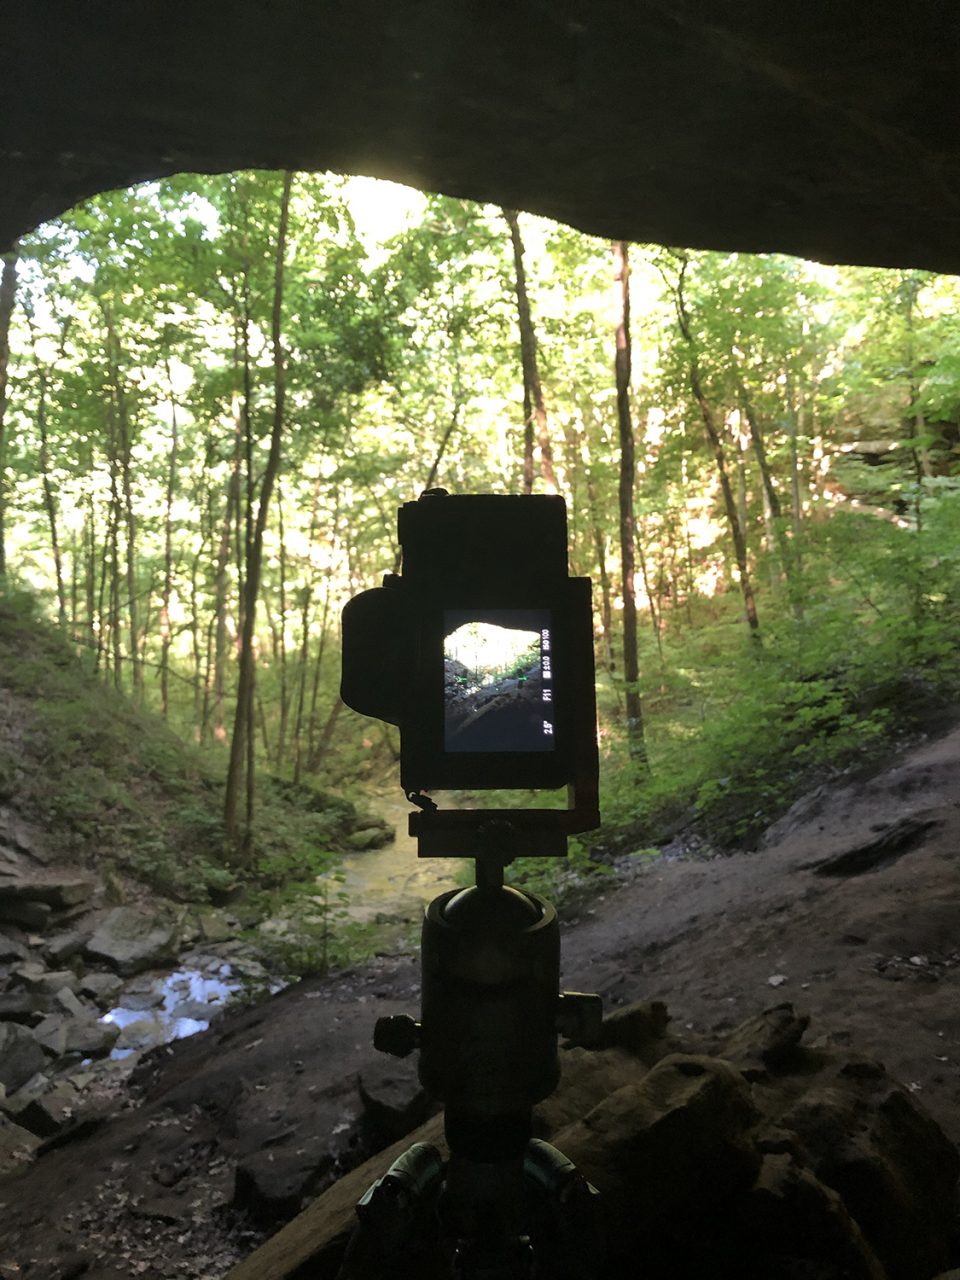 A look at he camera on a tripod inside the cave.